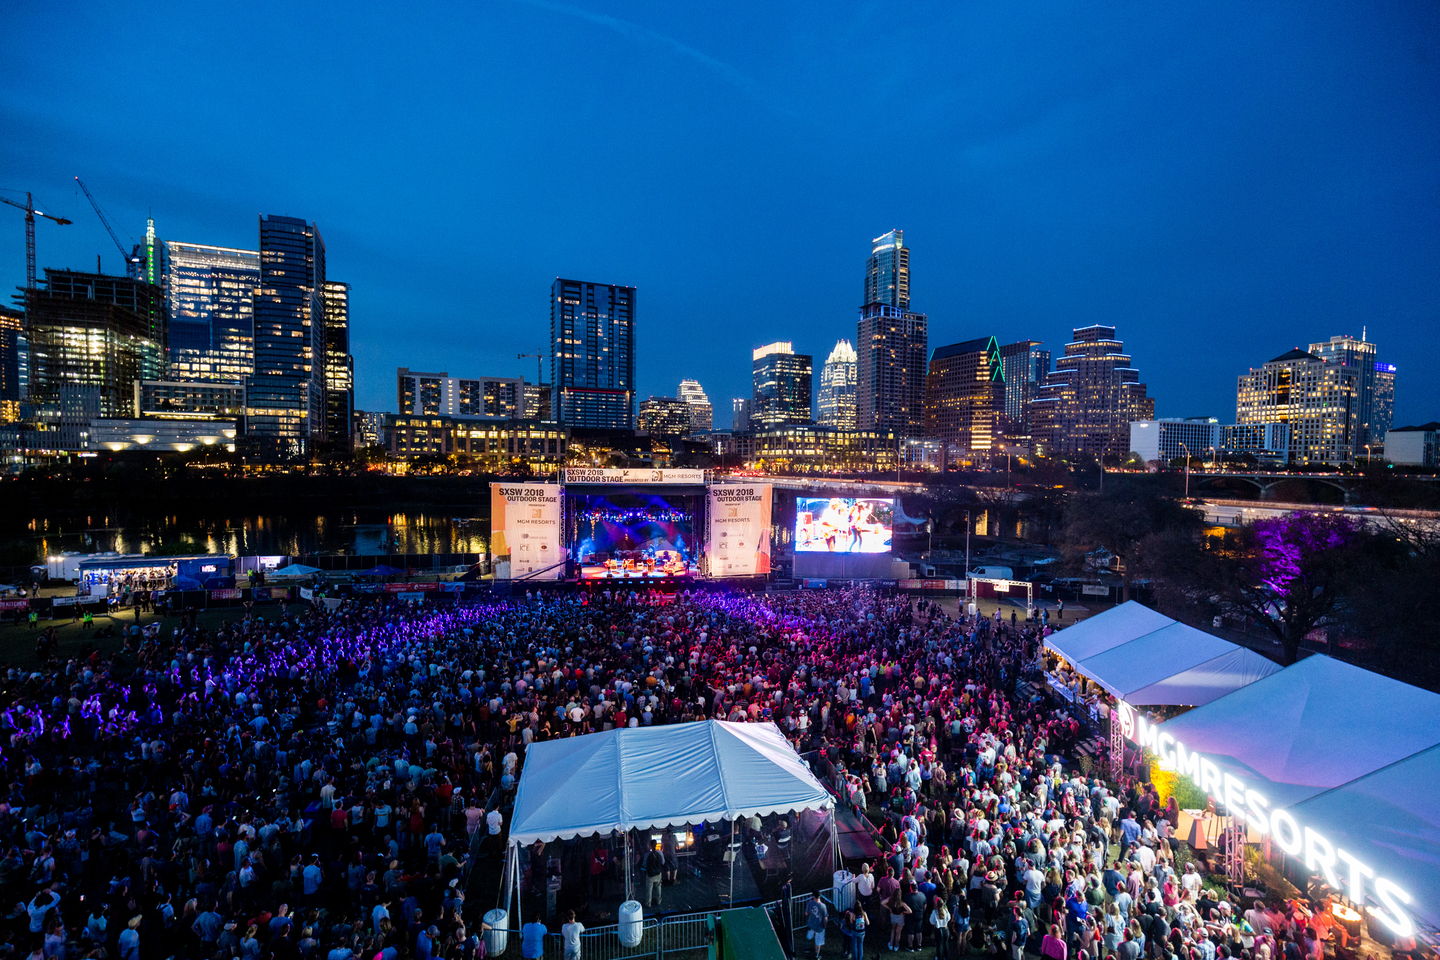 Aerial view of The SXSW Outdoor Stage presented by MGM Resorts. Photo by Waytao Shing